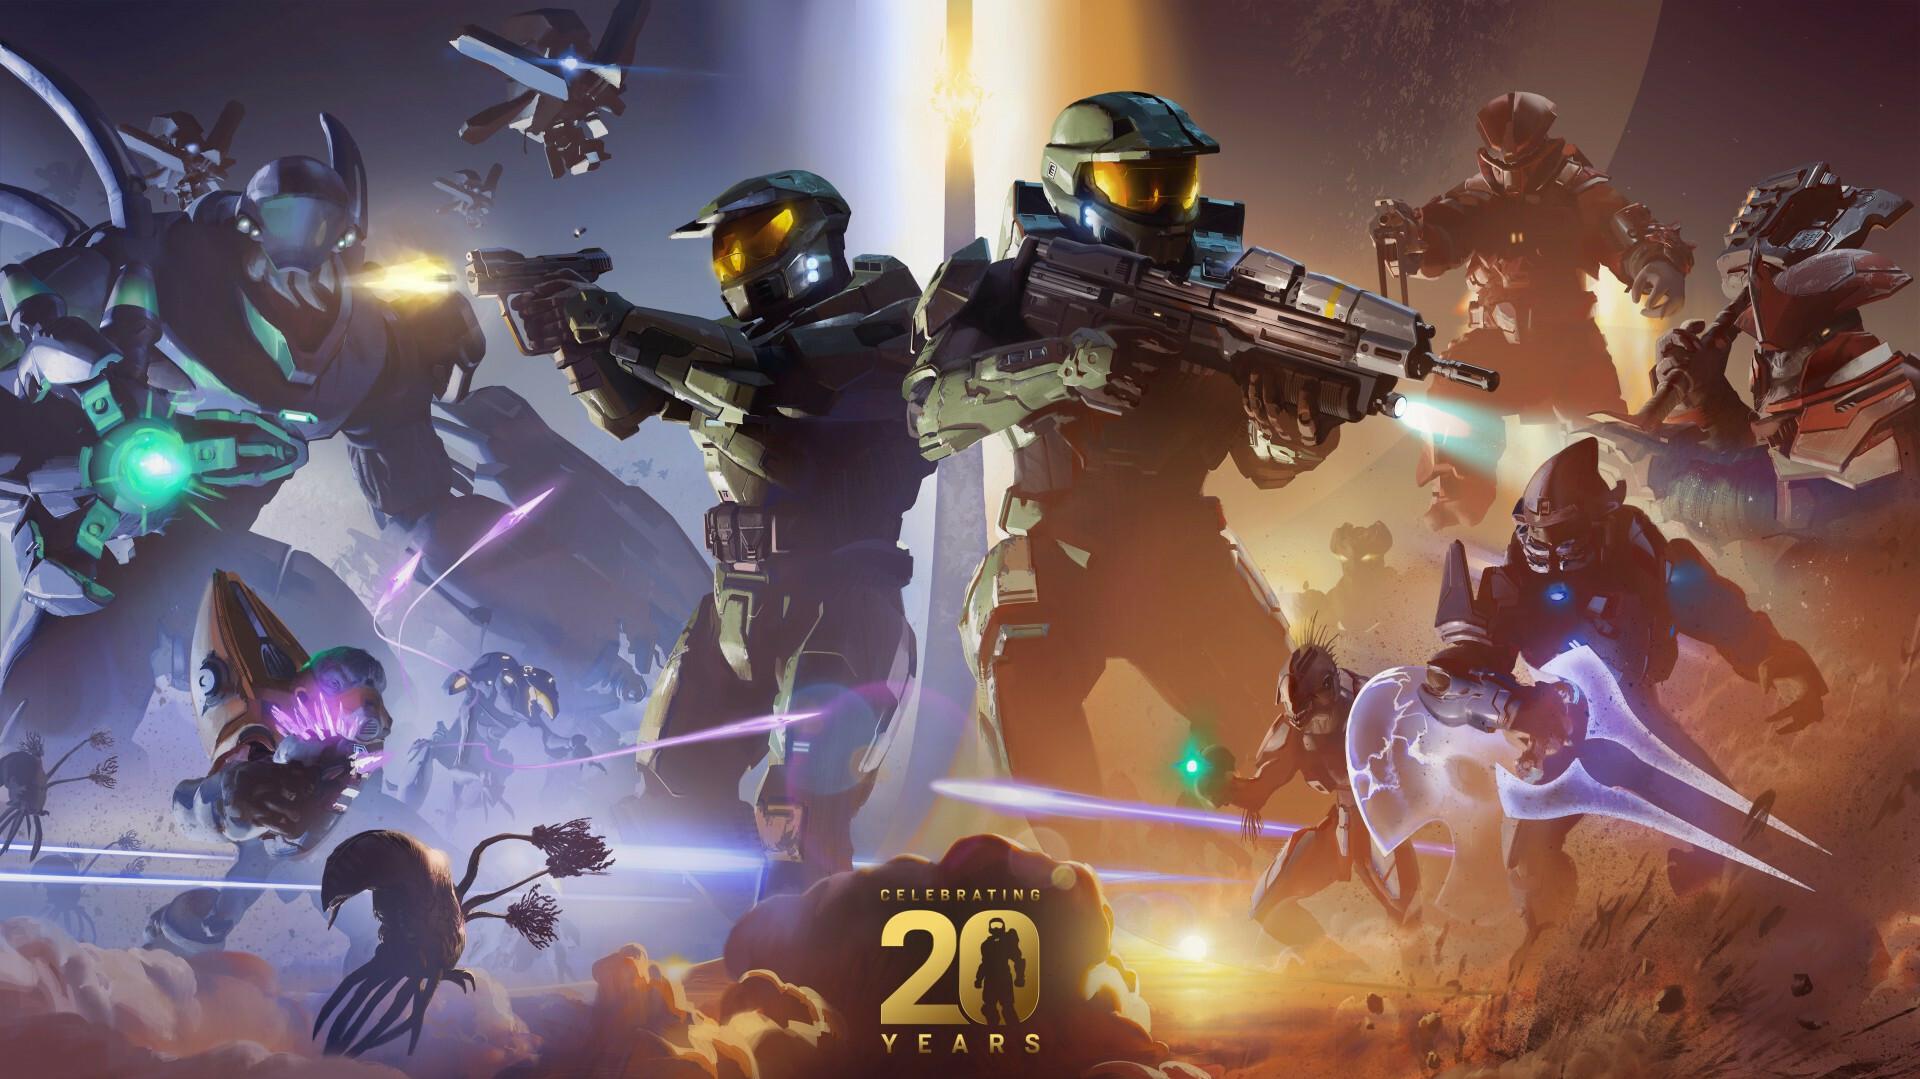 Xbox Celebrates 20th Anniversary With New Halo Artwork And More